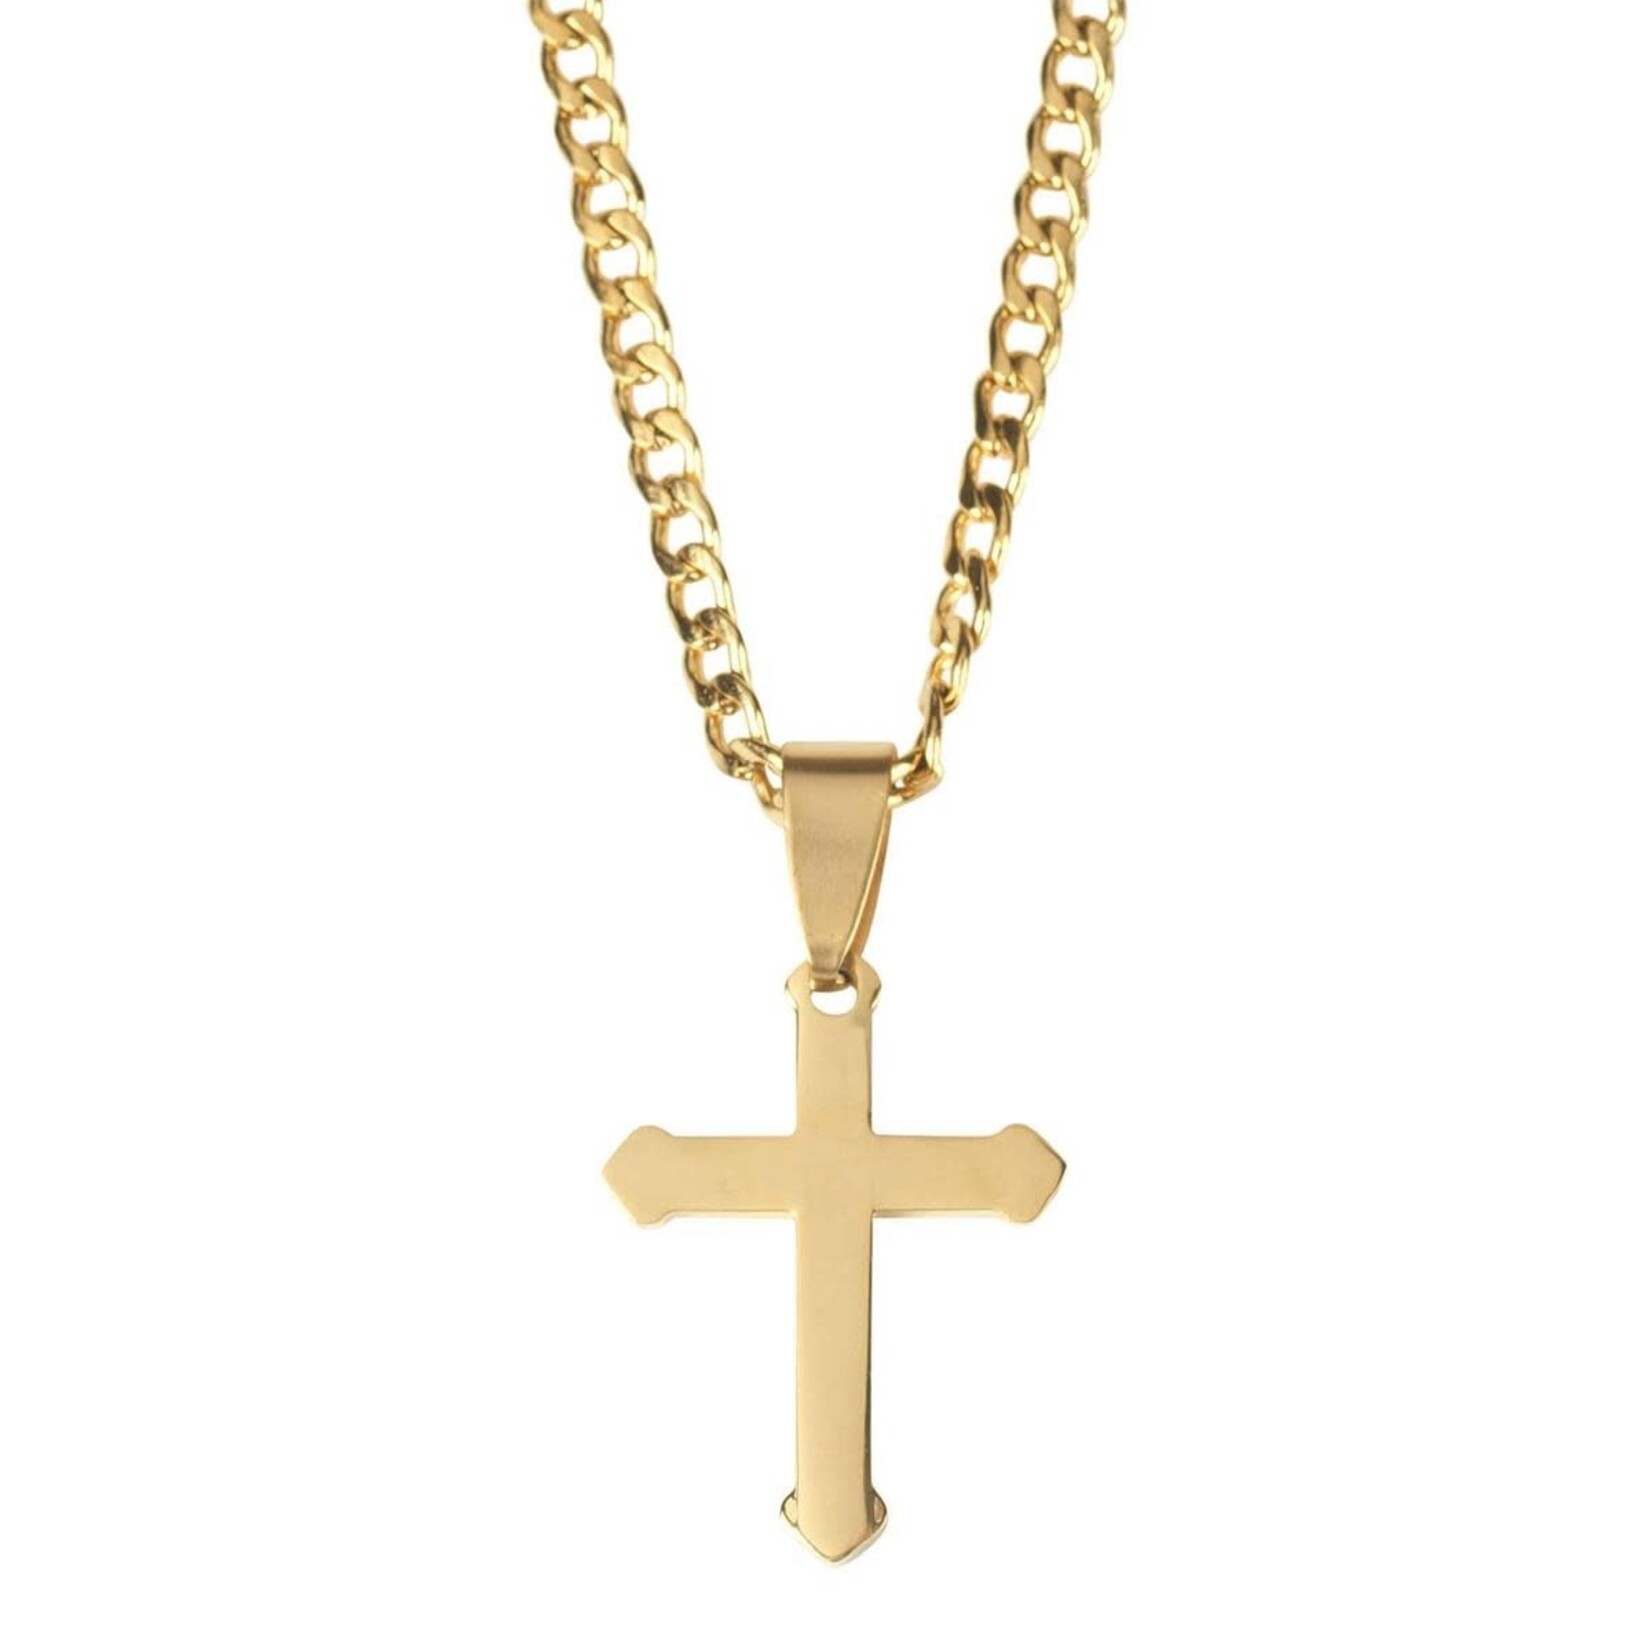 Men's Budded Cross Gold Plated Stainless Steel Necklace